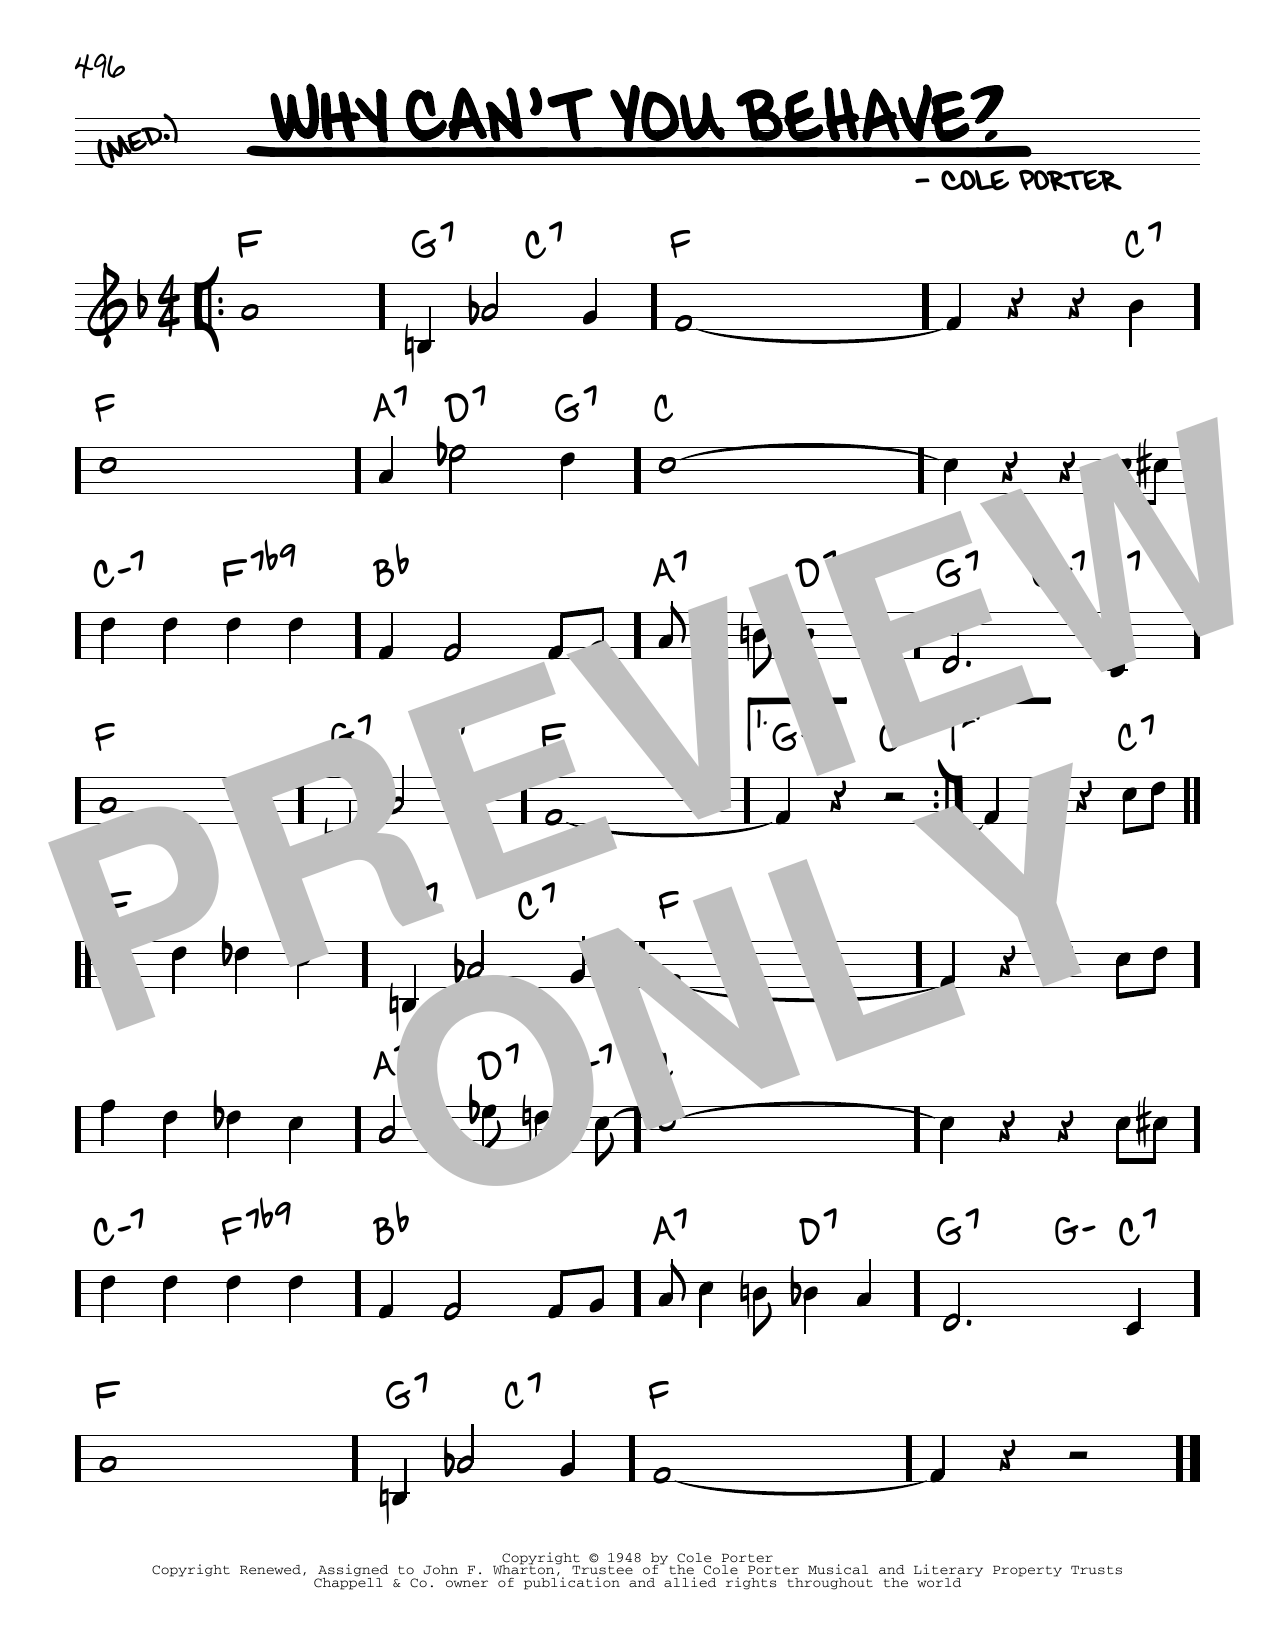 Download Cole Porter Why Can't You Behave? Sheet Music